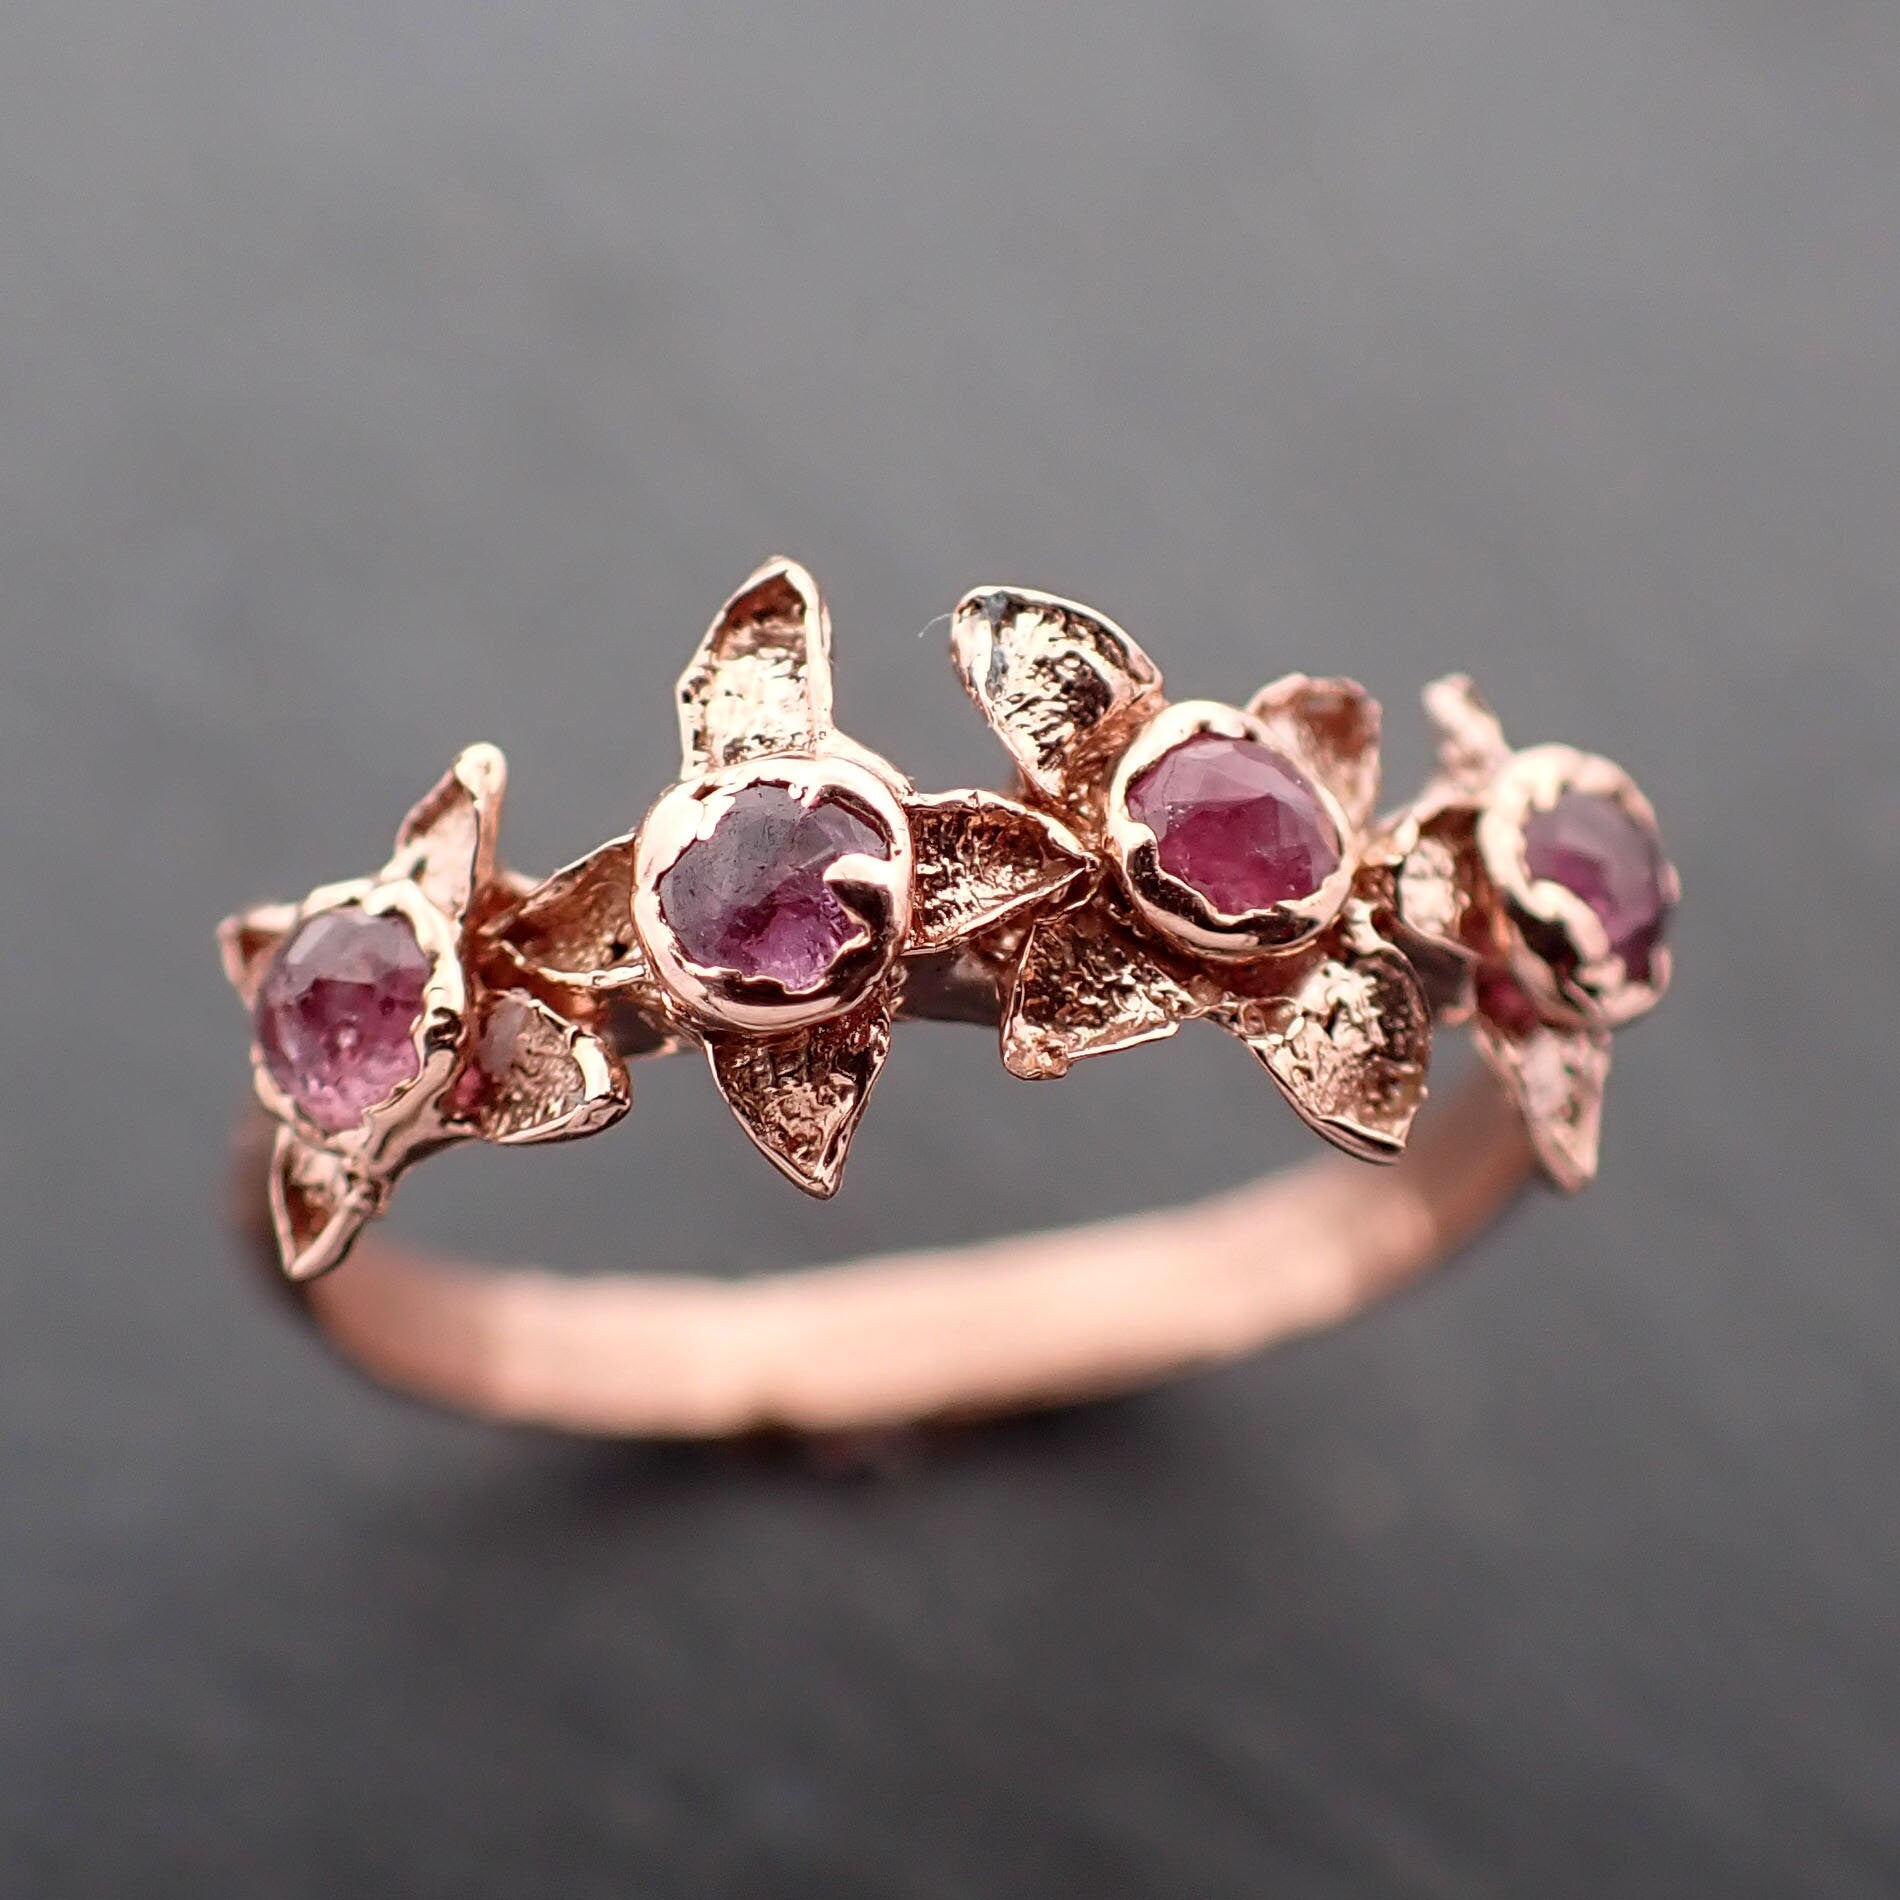 Real Lilac Flower casting with faceted Rubies 14k Rose gold multi stone Enchanted Garden Floral Ring byAngeline 3344